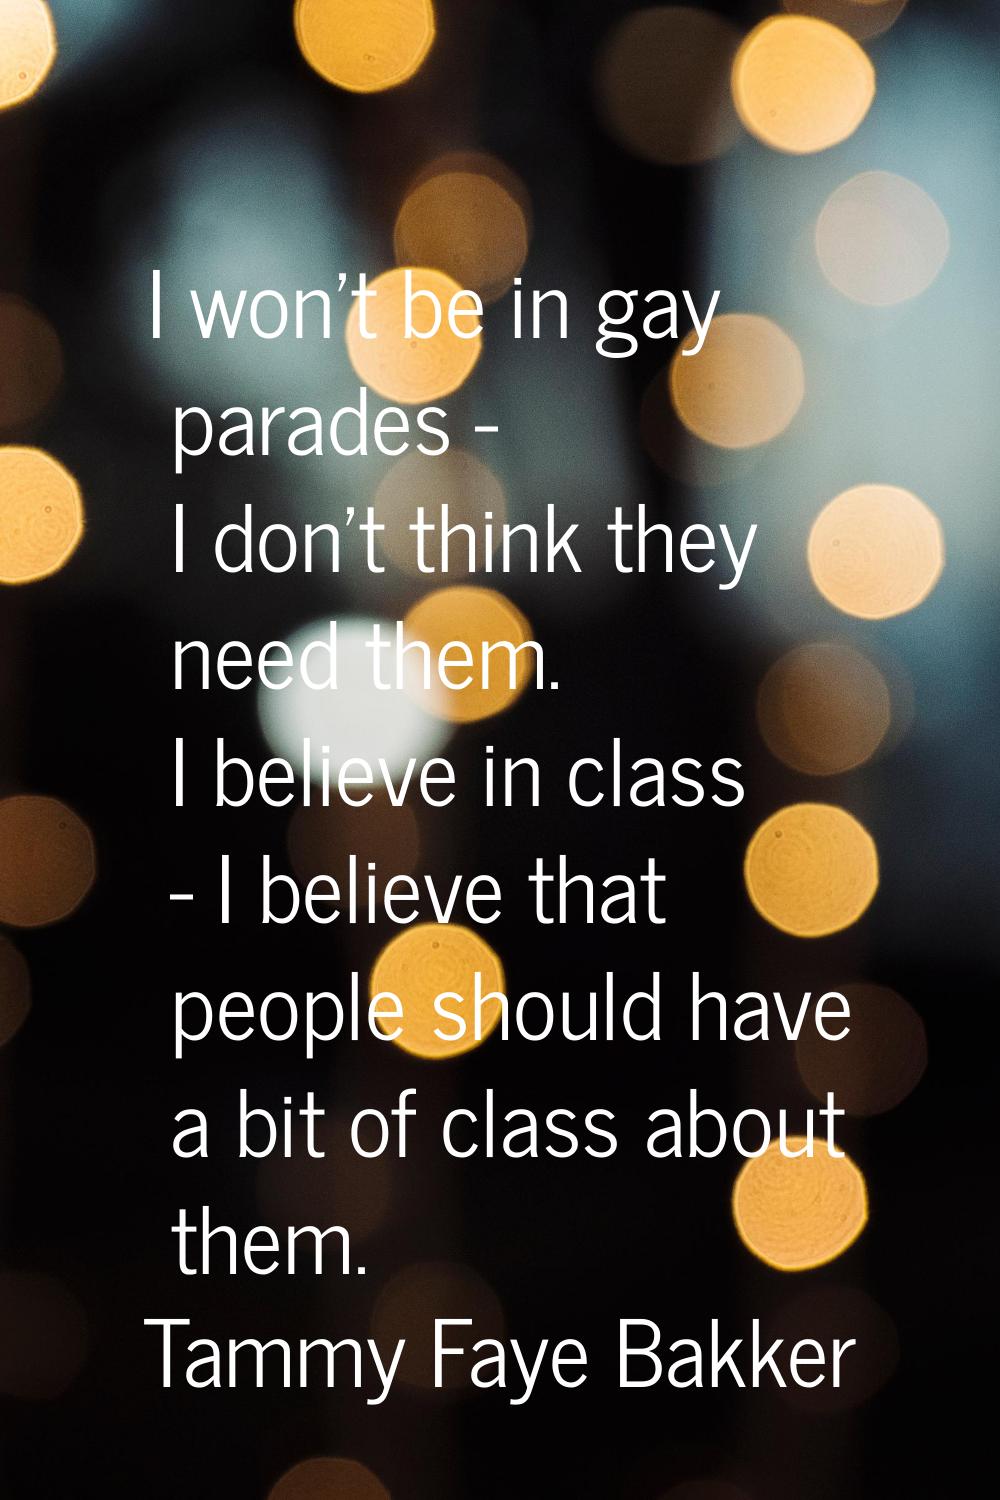 I won't be in gay parades - I don't think they need them. I believe in class - I believe that peopl